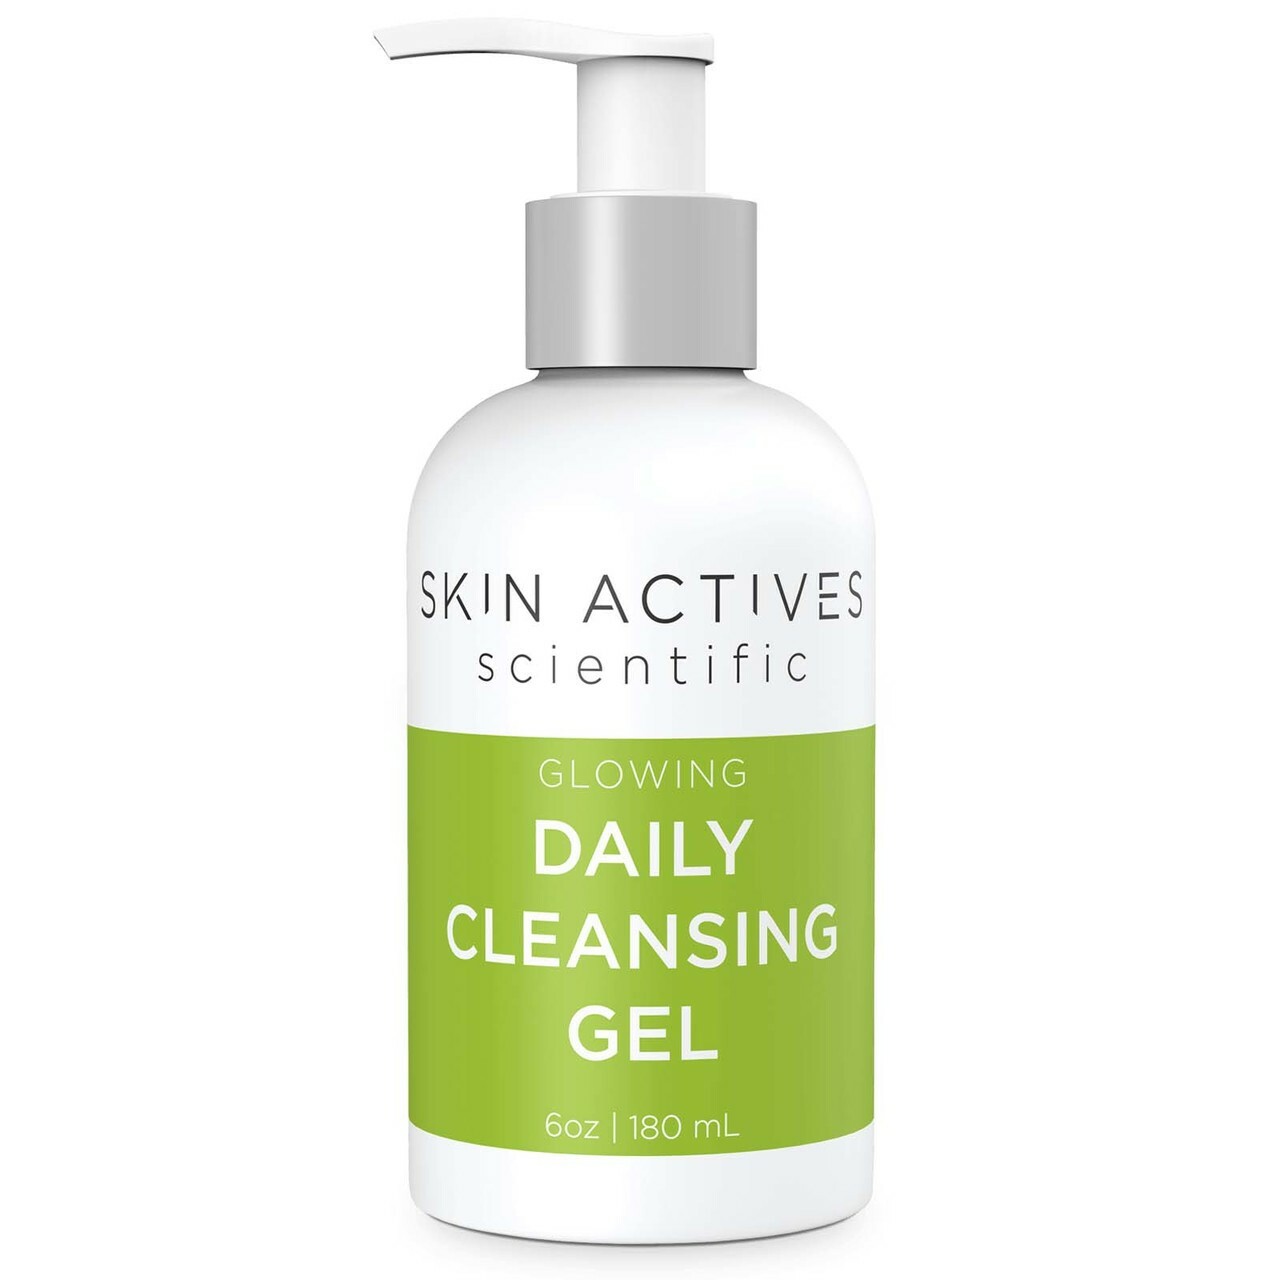 Face Cleanser - Oily & Combination Skin - Skin Actives - 6.0 oz.